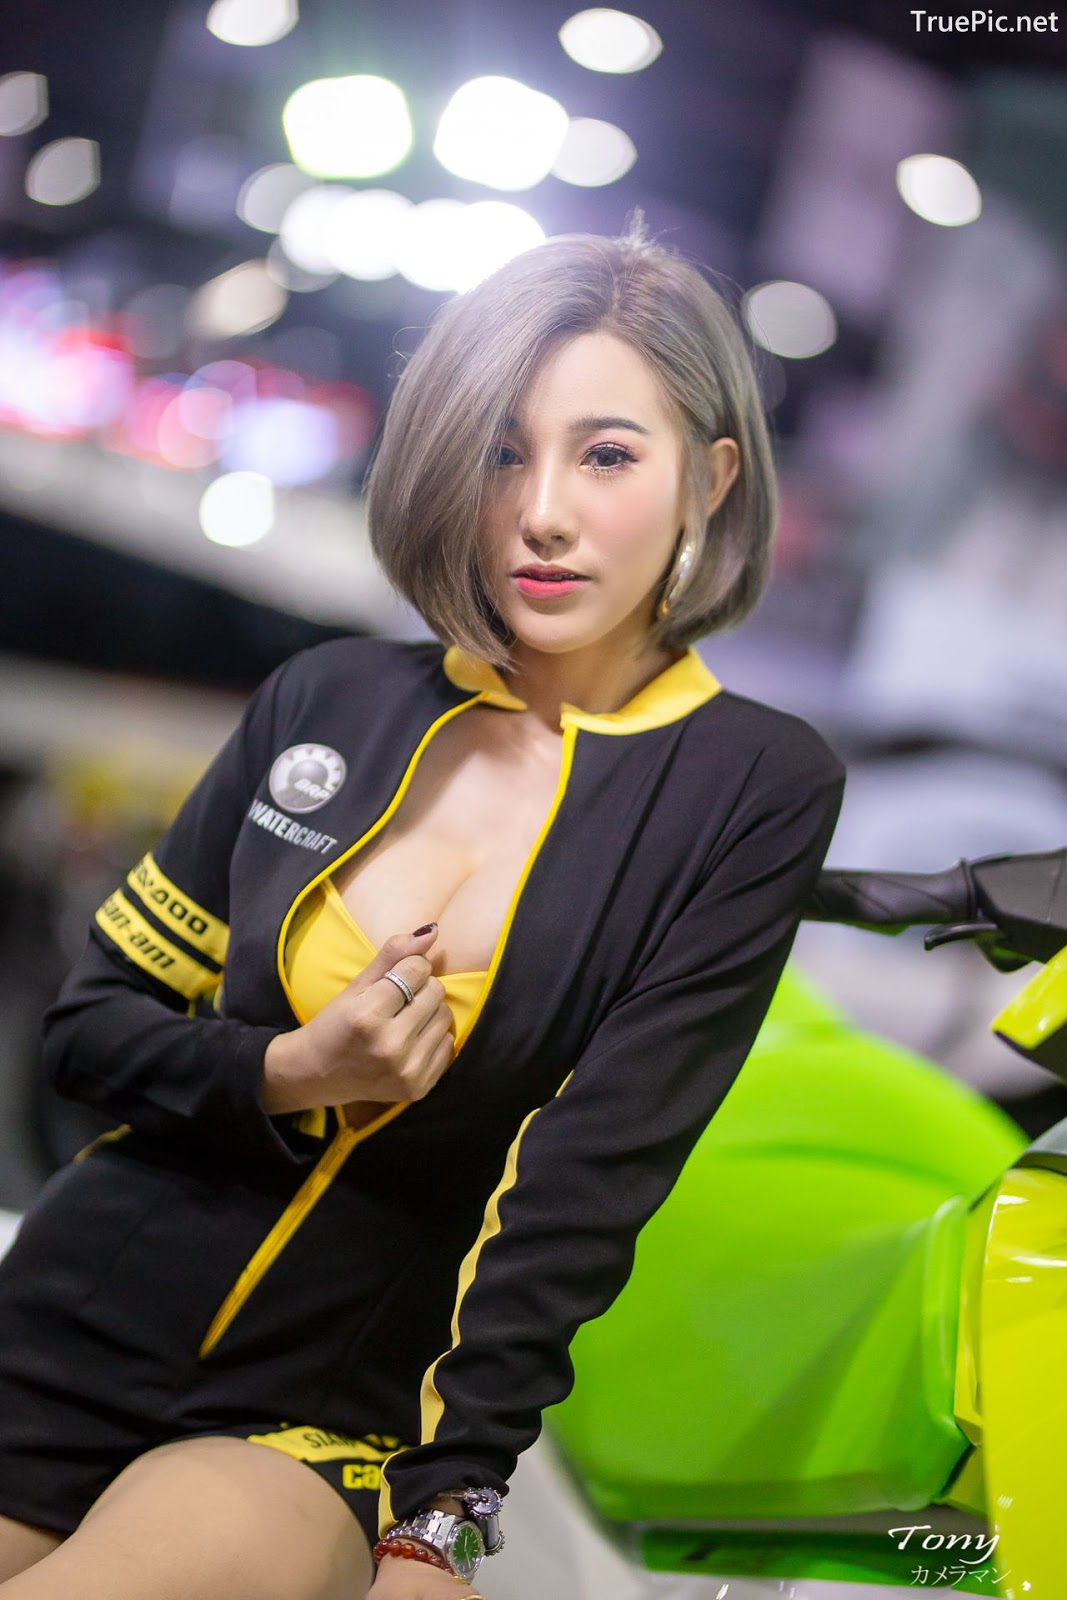 Image-Thailand-Hot-Model-Thai-Racing-Girl-At-Motor-Show-2019-TruePic.net- Picture-63